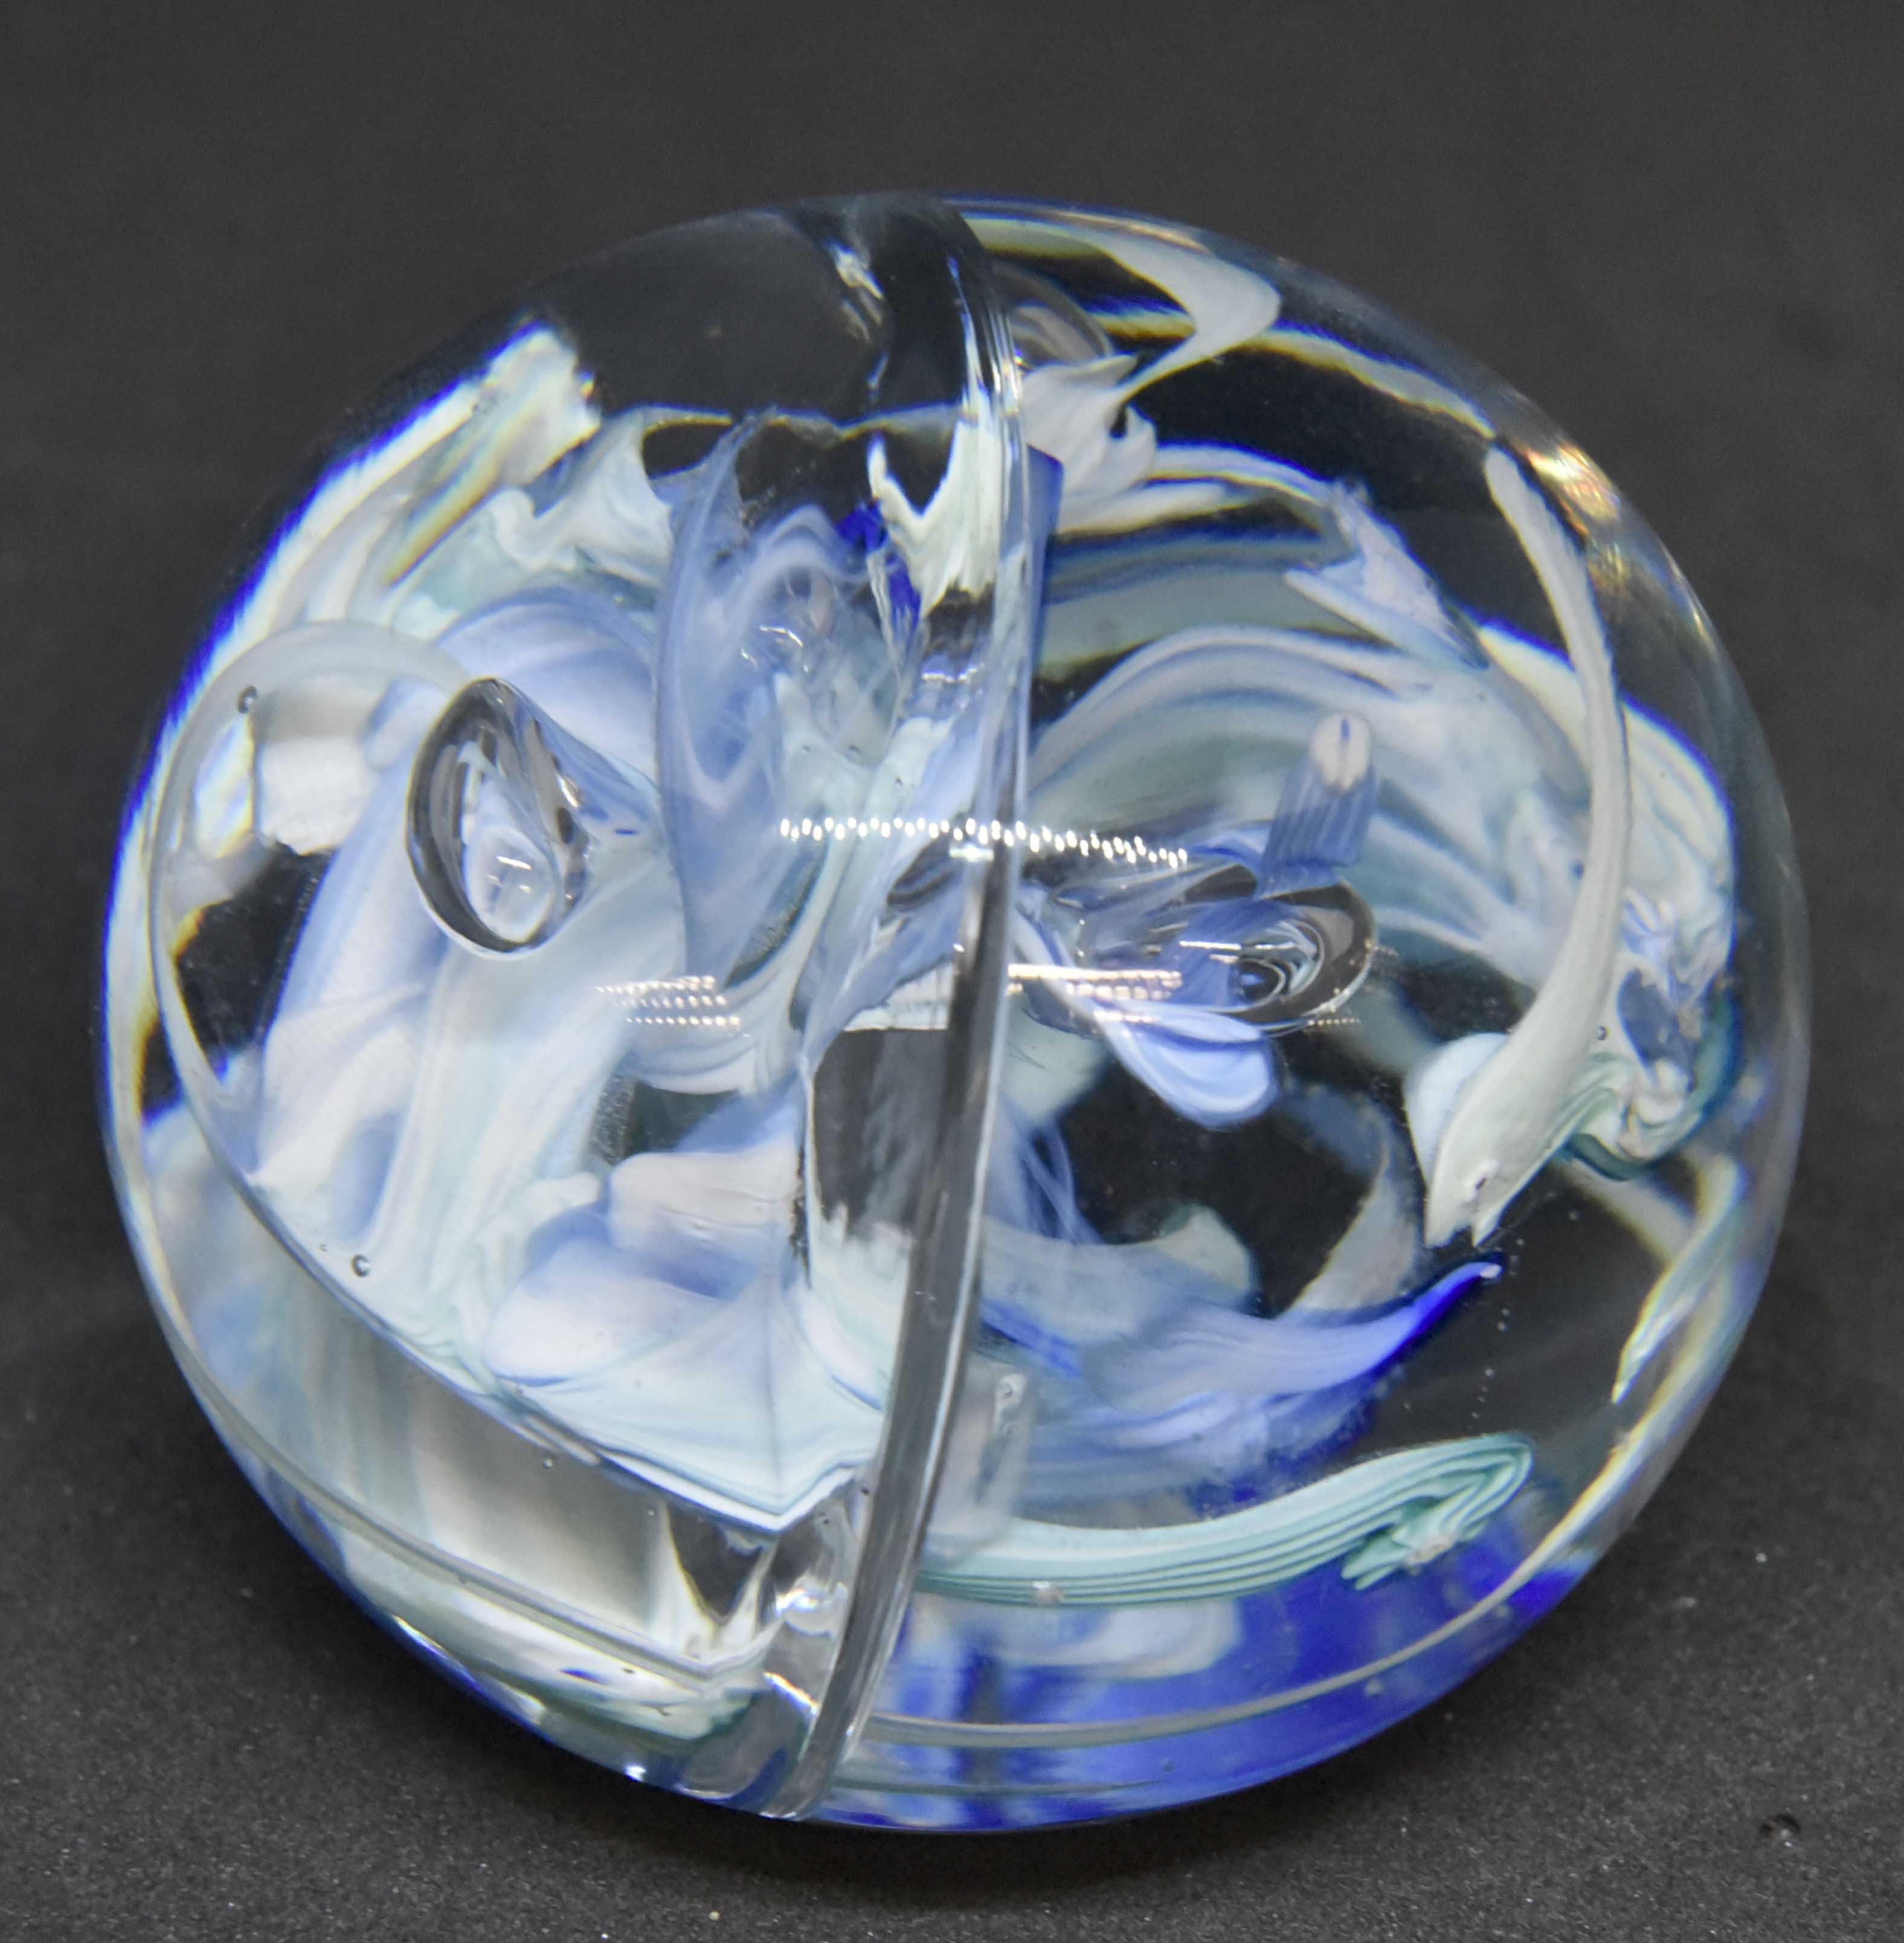 Whitefriars Ribbon swirl paperweight. Trial, never went into production.